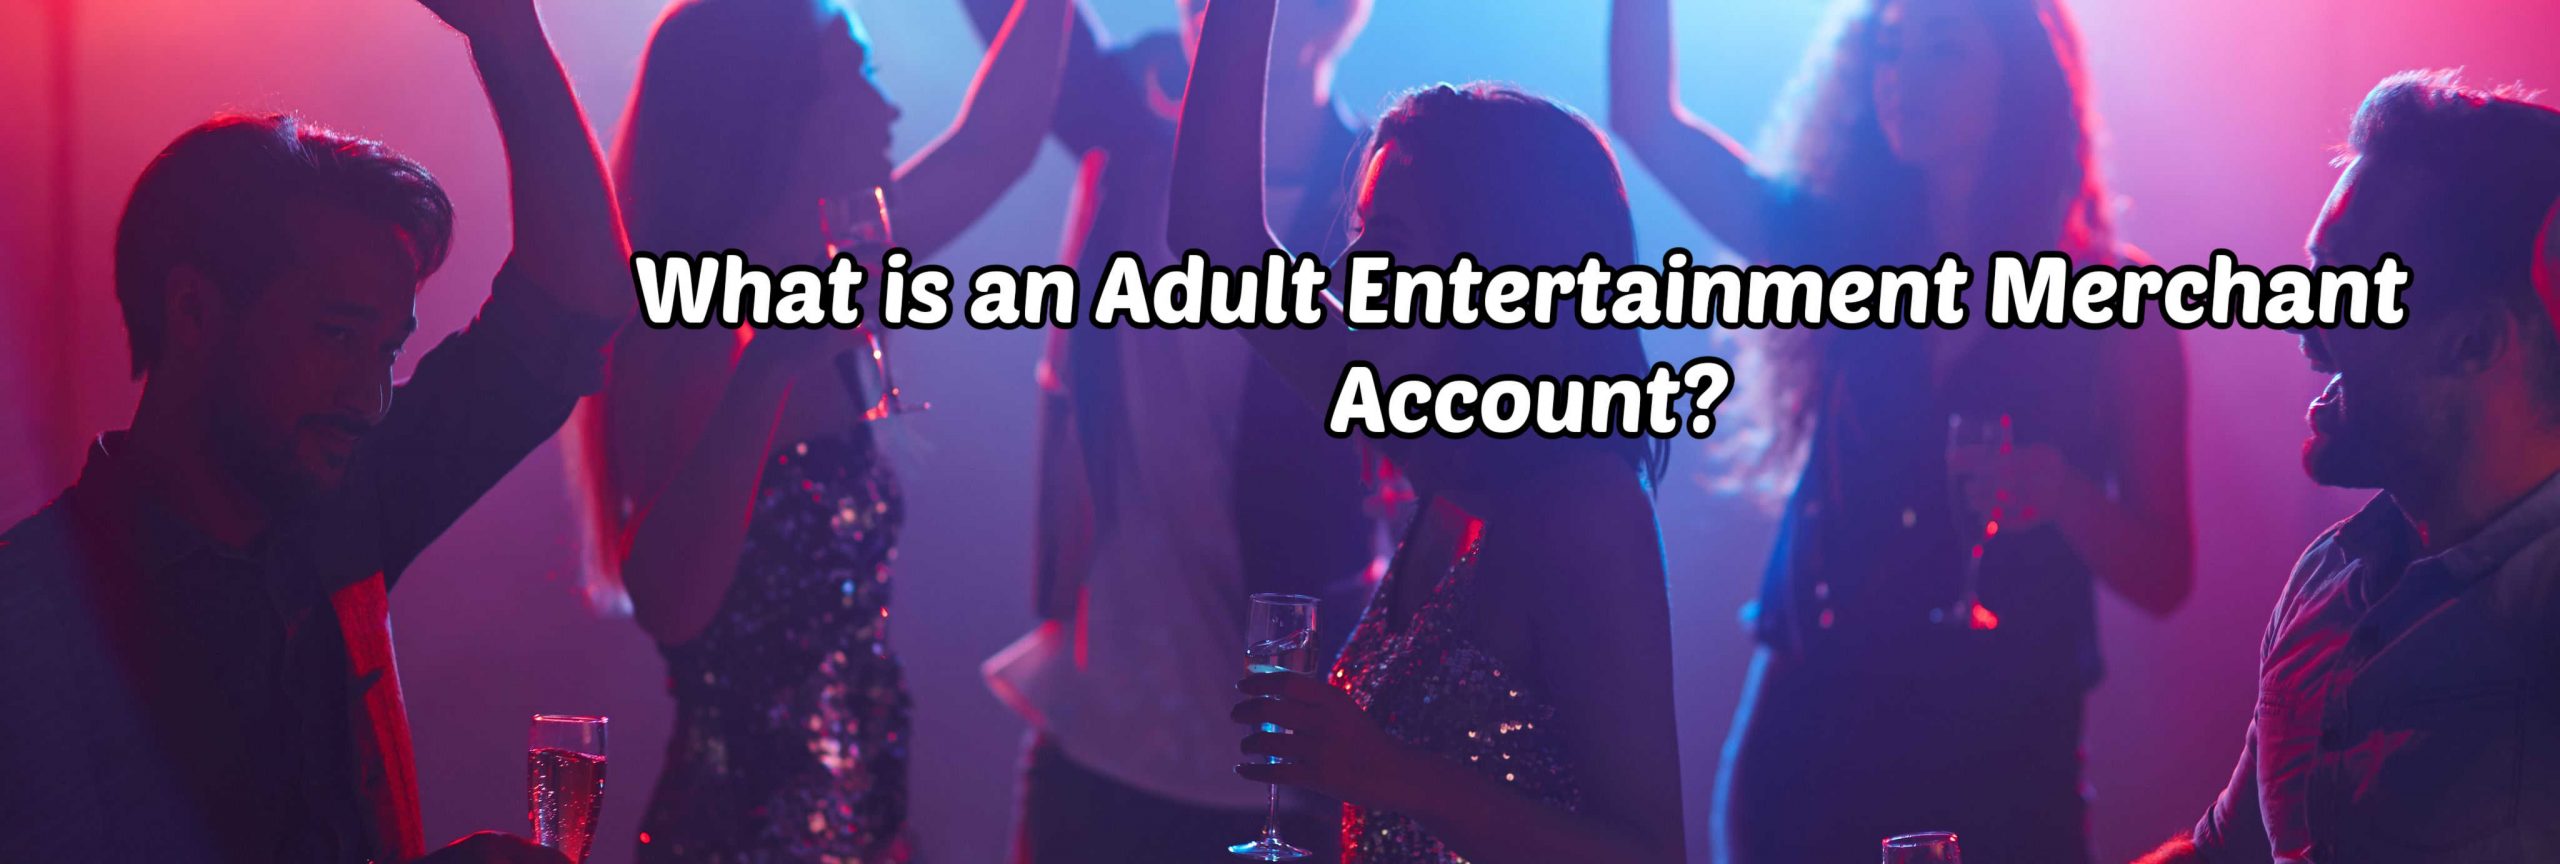 image of what is adult entertainment merchant account